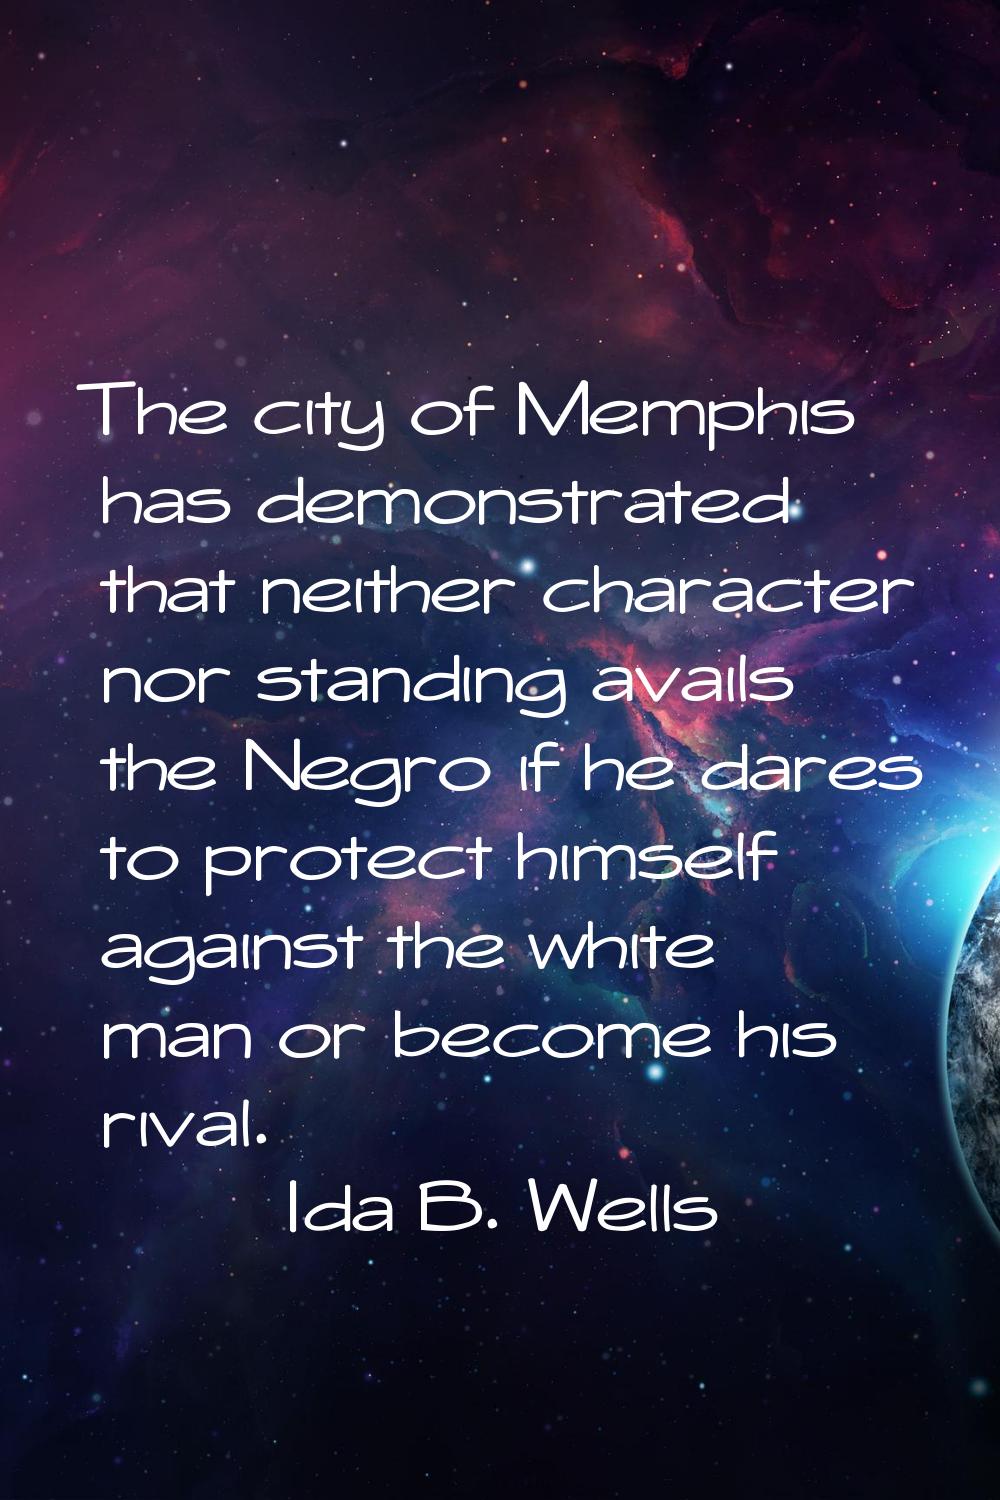 The city of Memphis has demonstrated that neither character nor standing avails the Negro if he dar